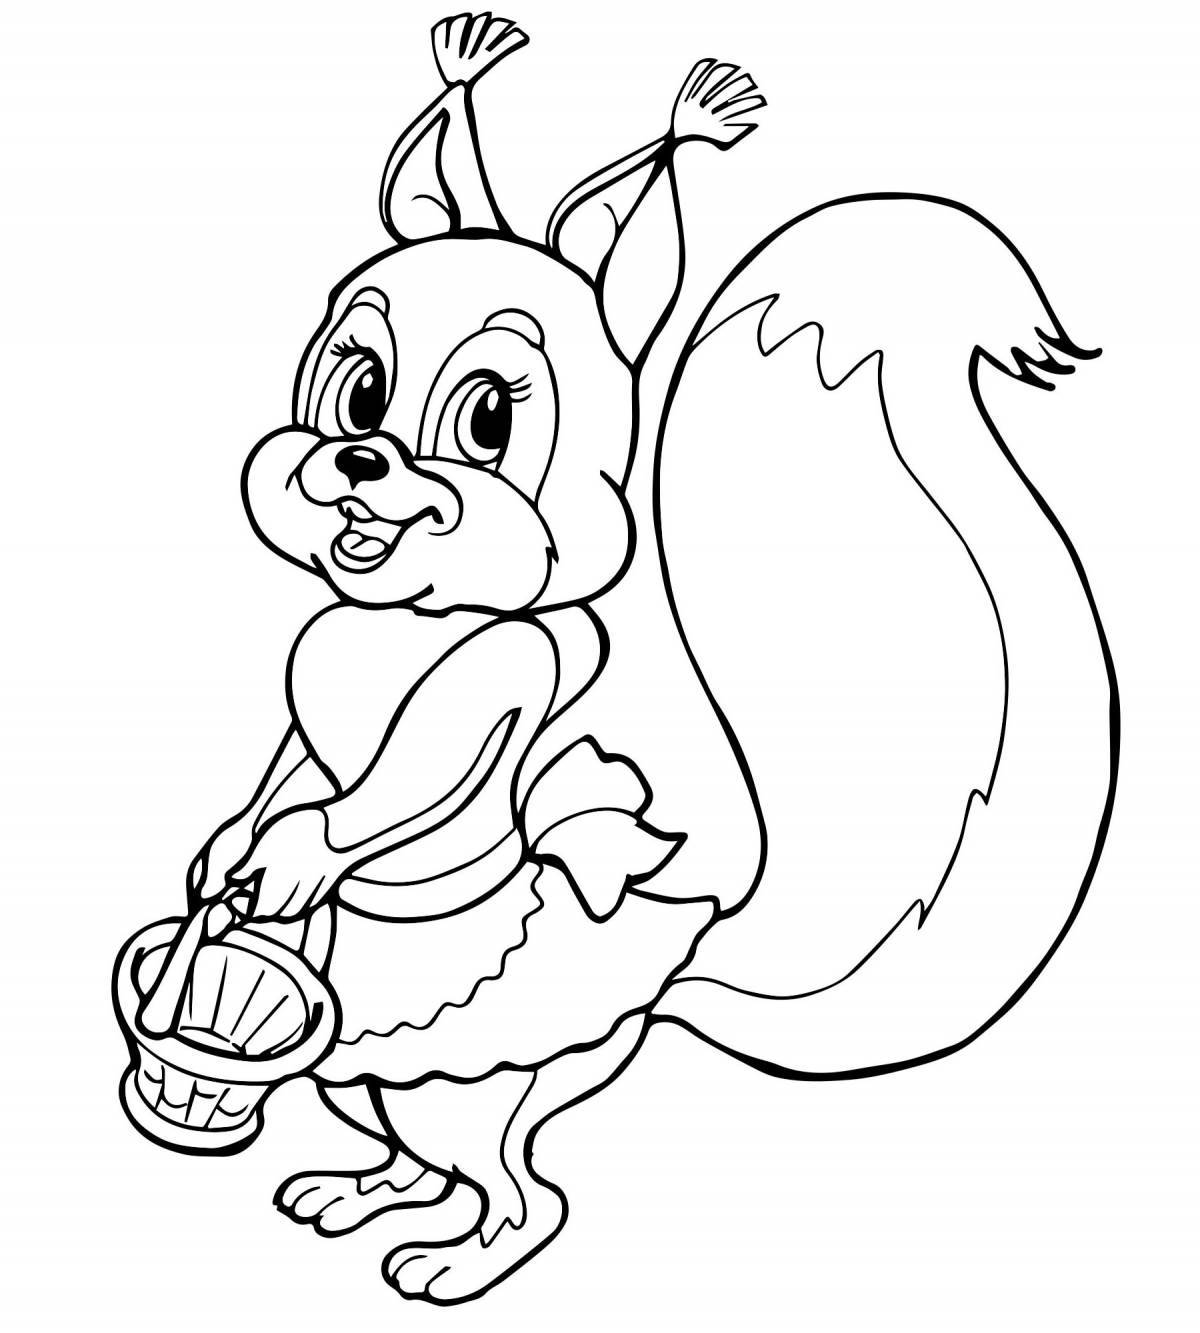 Squirrel for kids #4